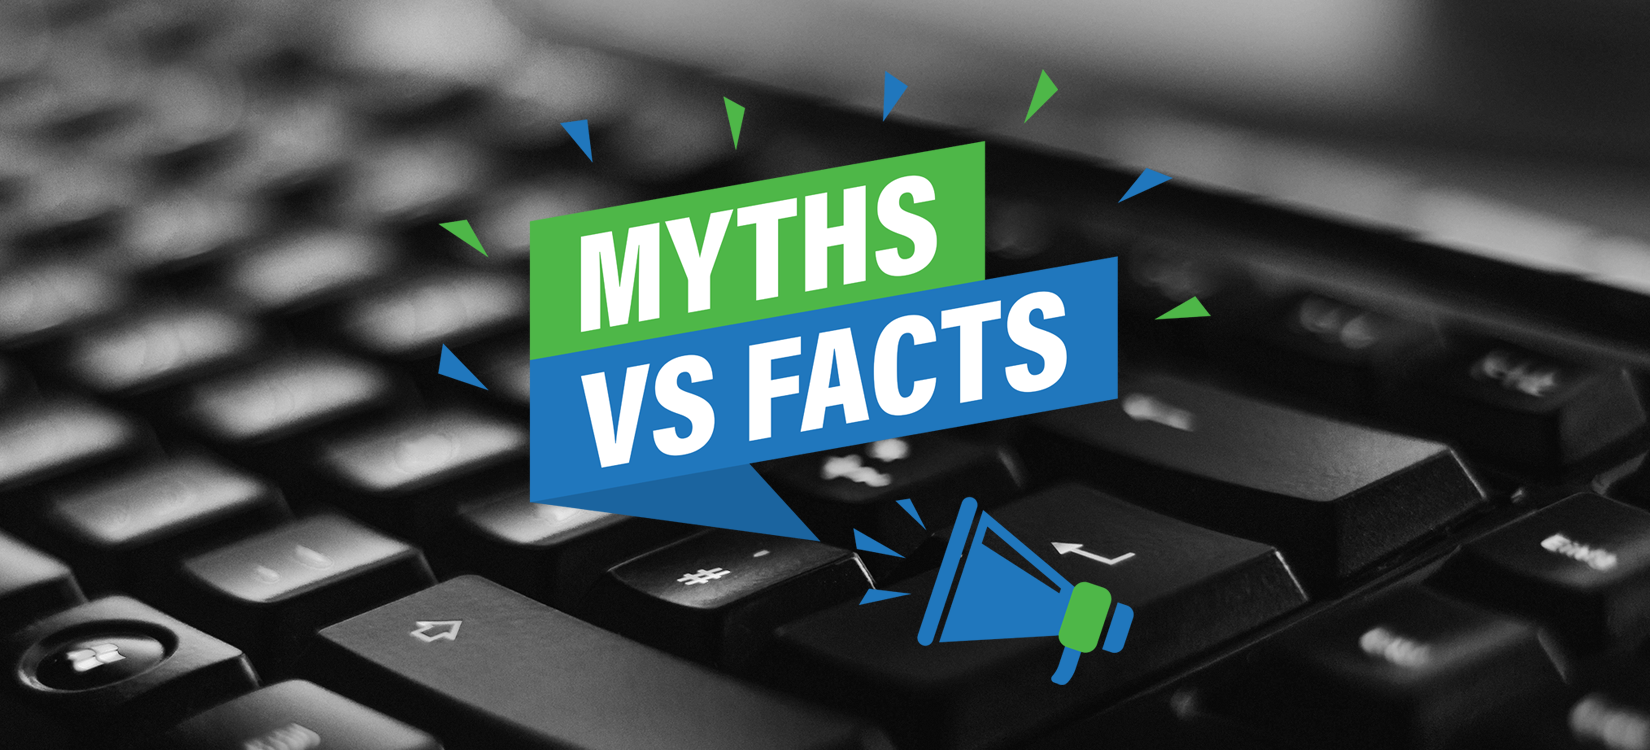 5 Myths About eProcurement Systems (And Why They Aren’t True)